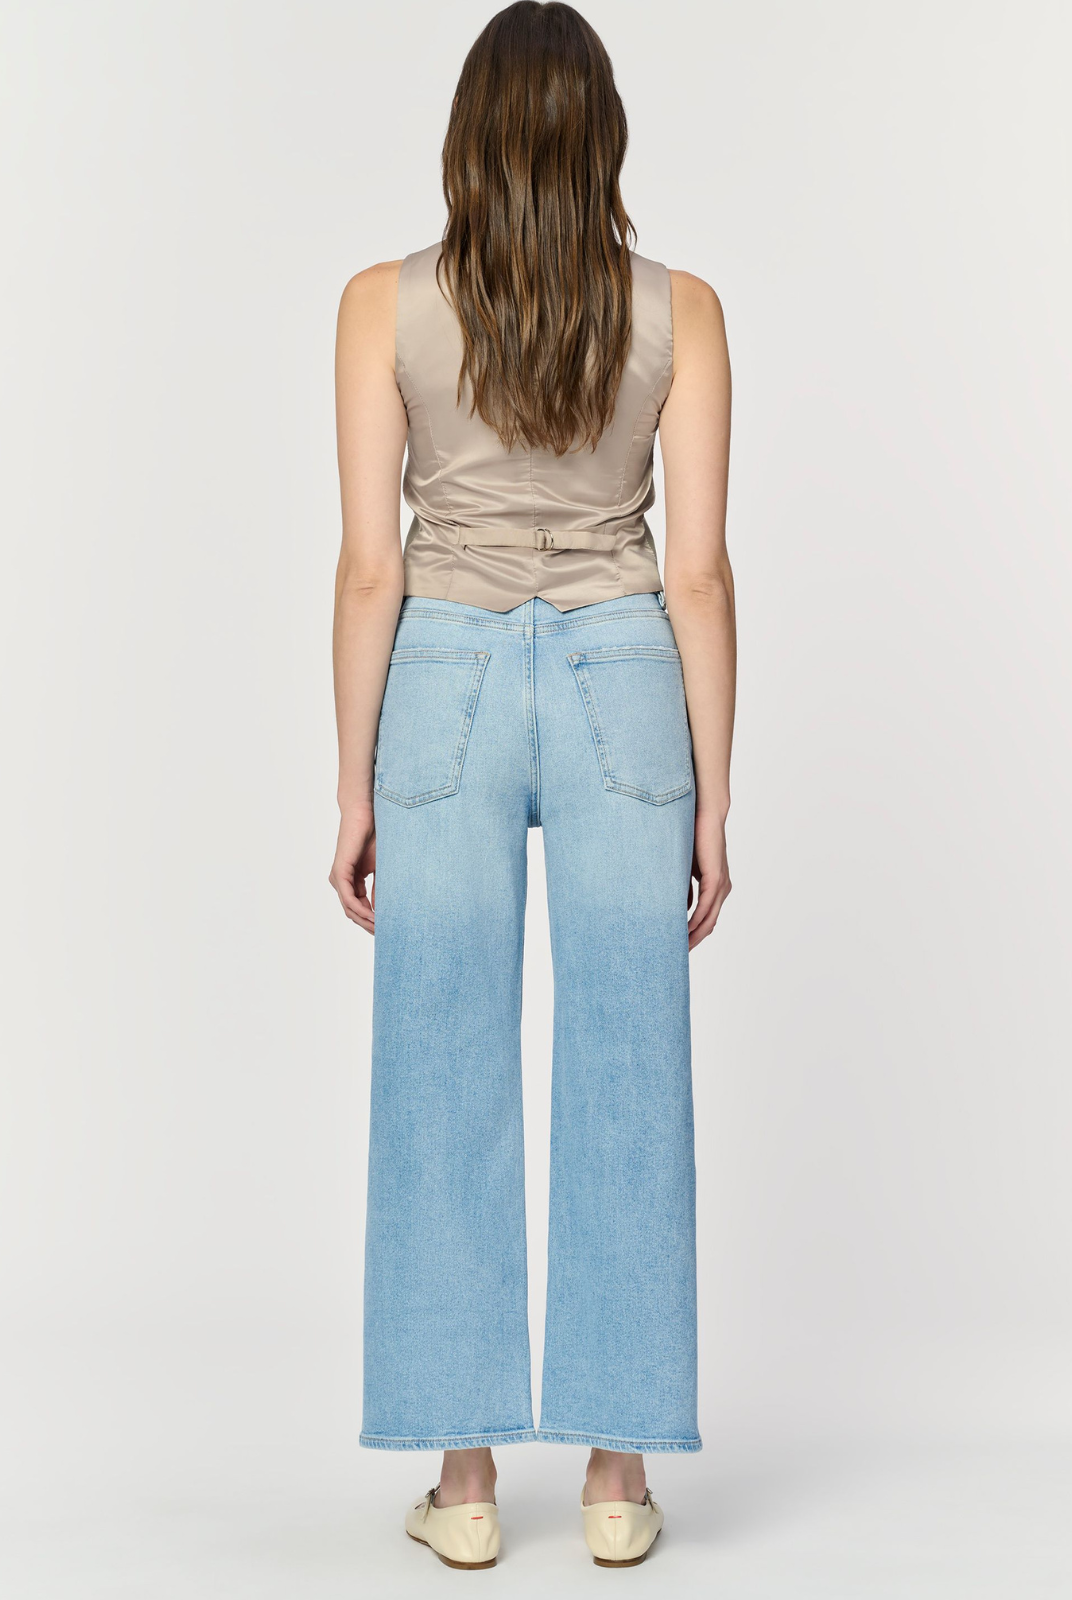 Warp+Weft ICN Wide Leg Jean <p class="MsoNormal">A nod to trendsetting style in Seoul, this high-rise style is a fresh alternative to your skinnies. Sculpts through the midsection and widens out through the leg to a flattering A-line shape. Modern, timeless and versatile.<u></u><u></u></p> <p class="MsoNormal">&nbsp;</p>